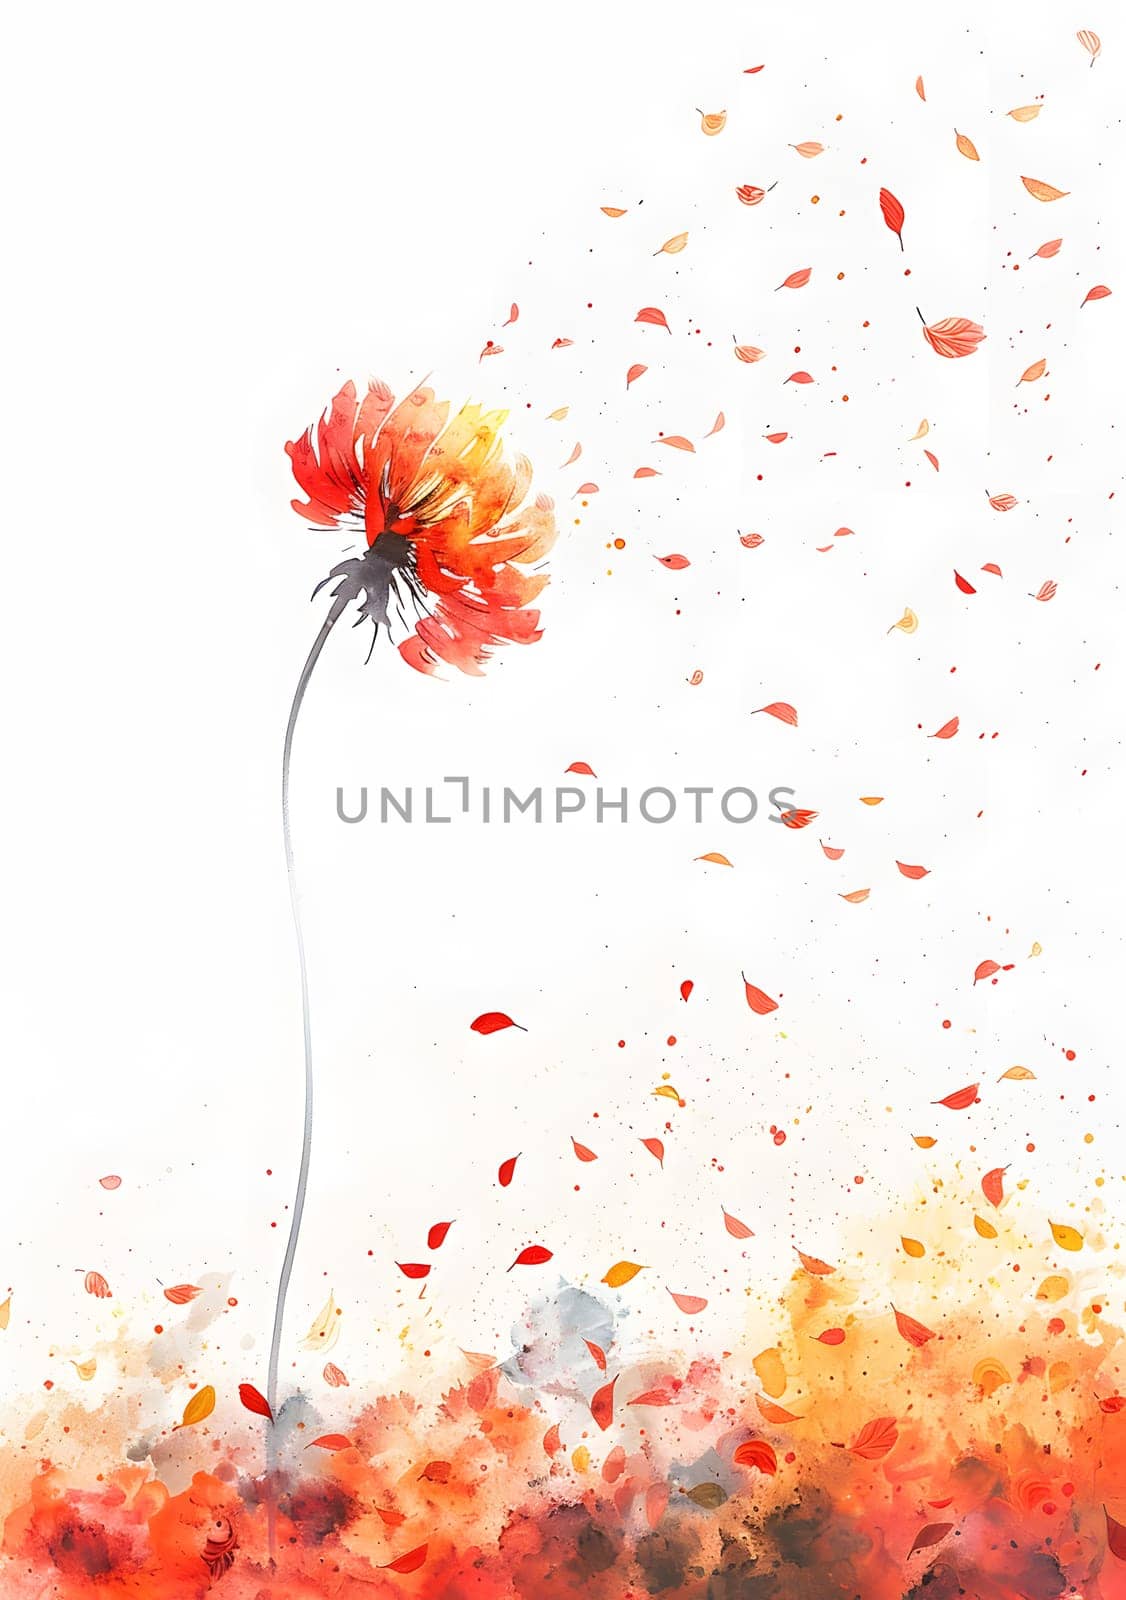 Watercolor painting of a red flower with falling petals in a natural landscape by Nadtochiy